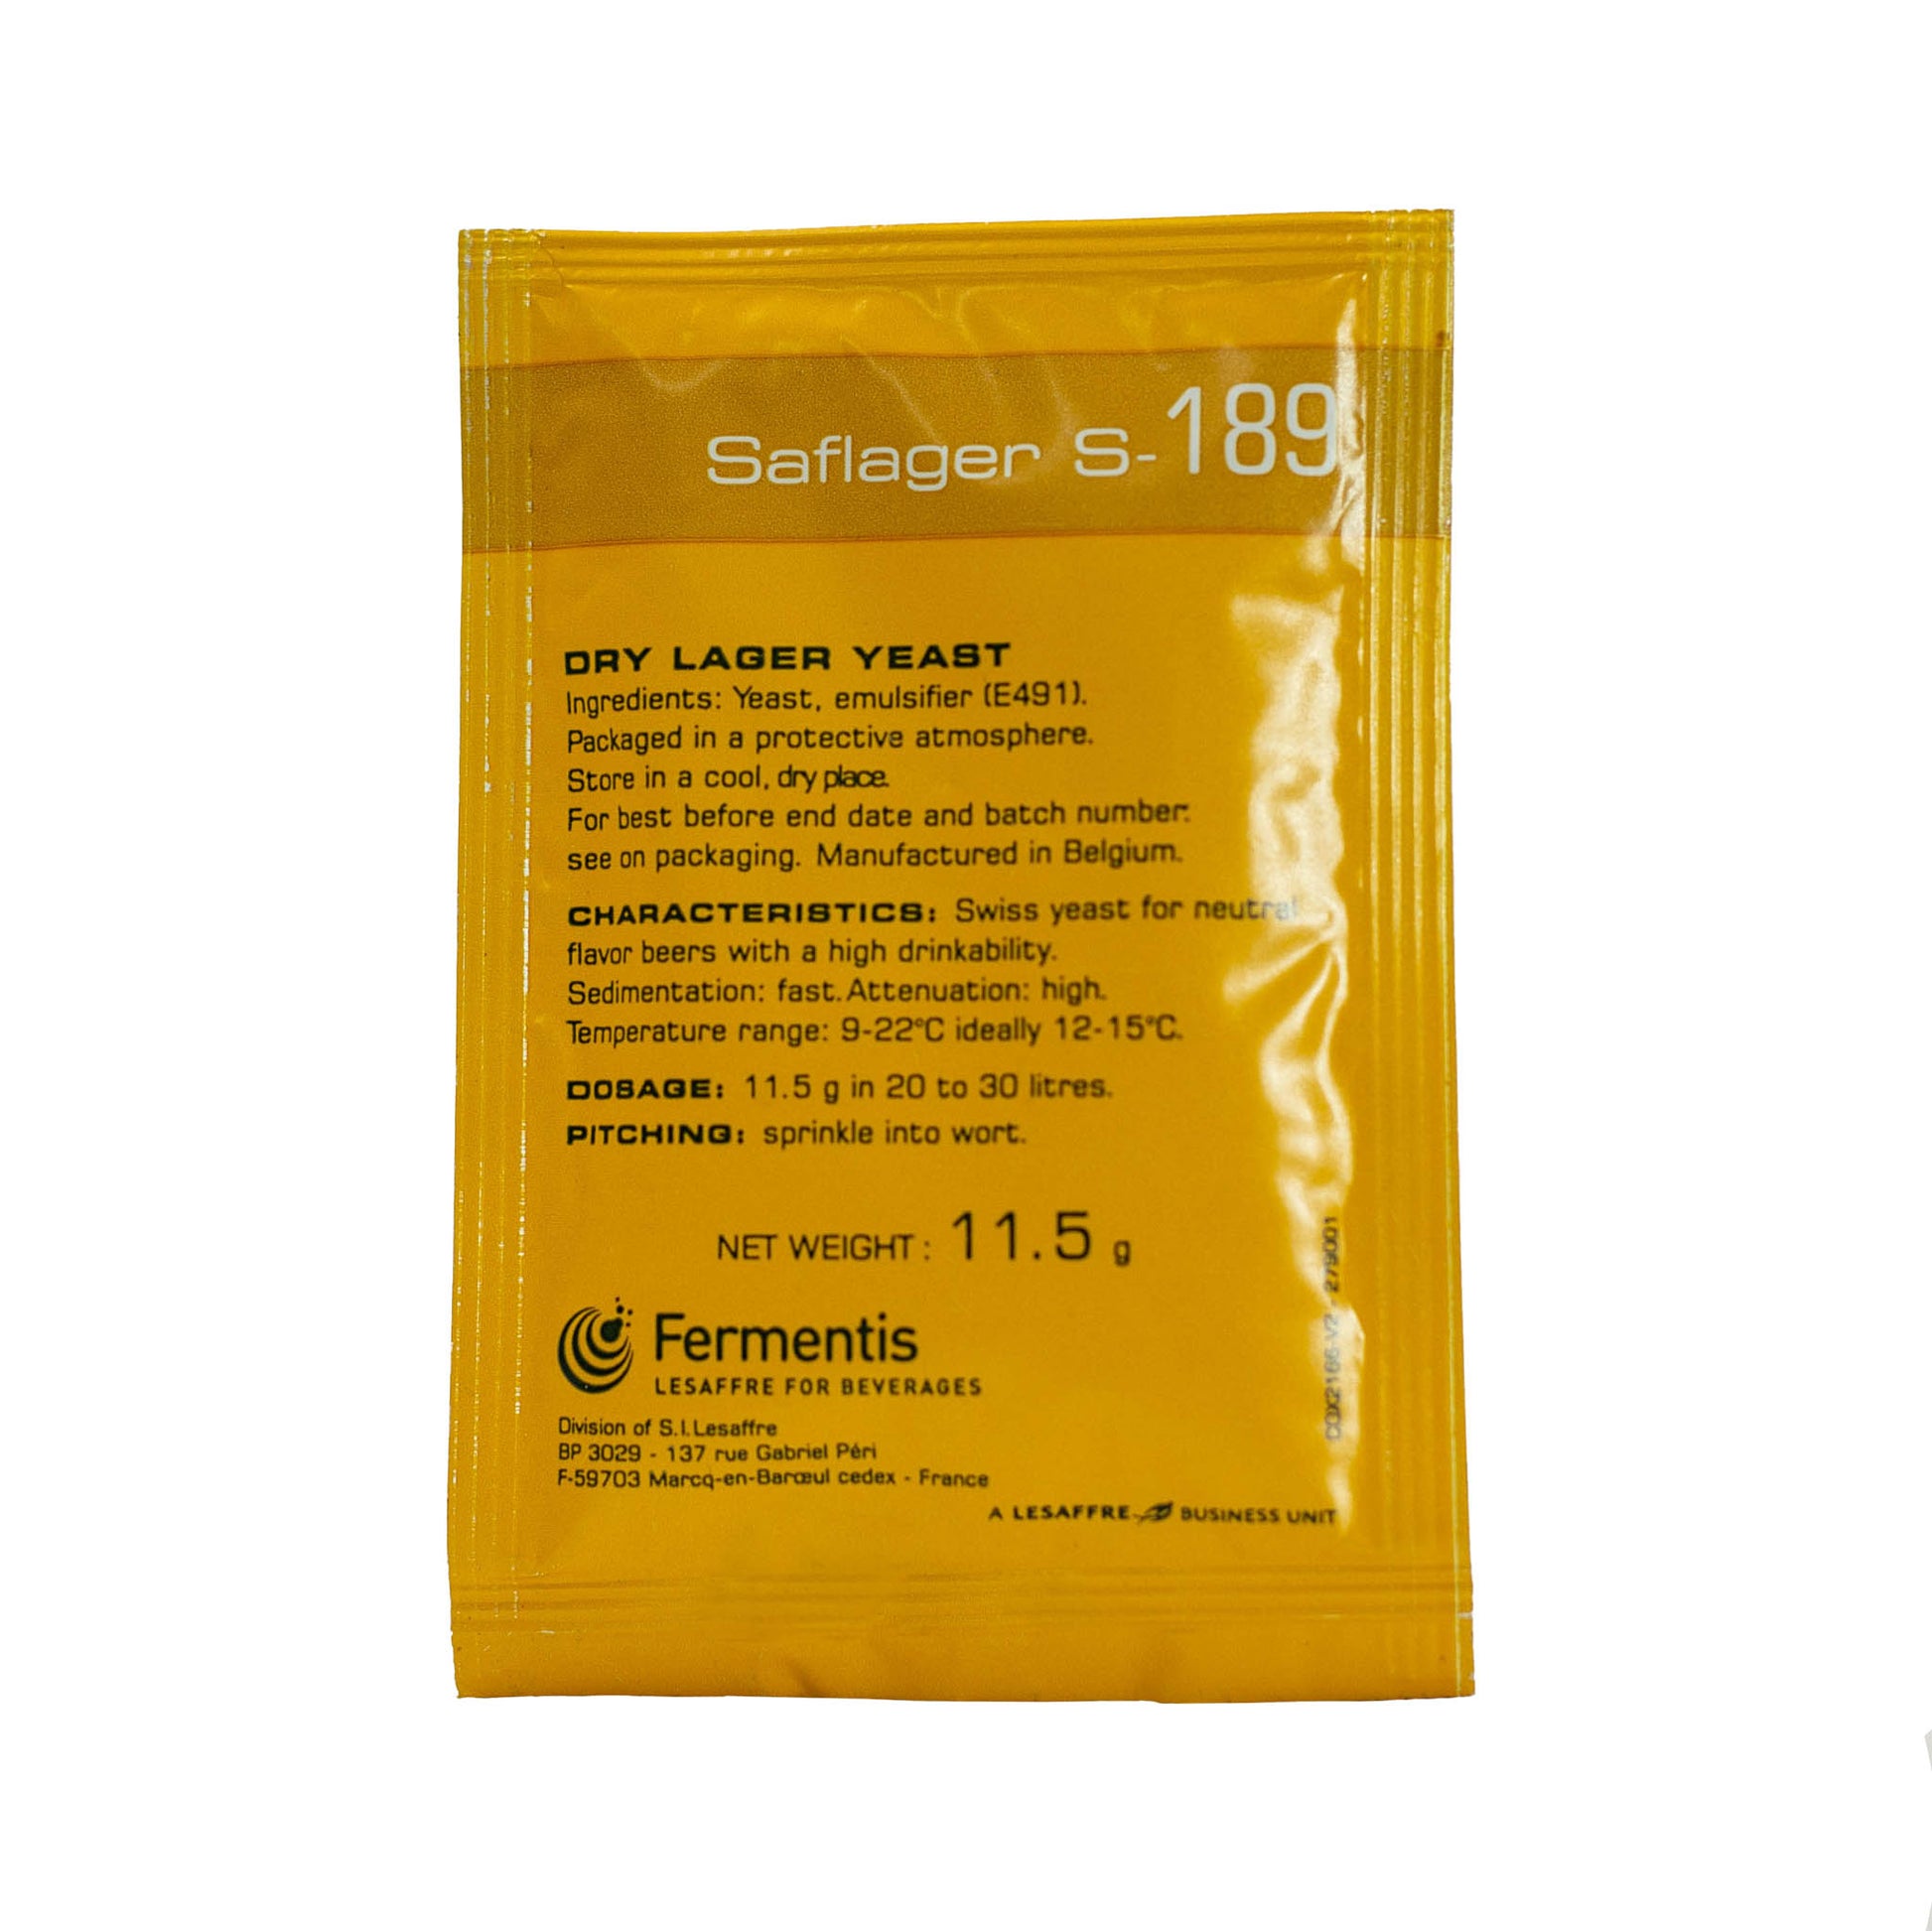 Saflager S 189 dry lager brewing yeast. This lager strain‰۪s attenuation profile allows to brew fairly neutral flavour beers with a high drinkability.